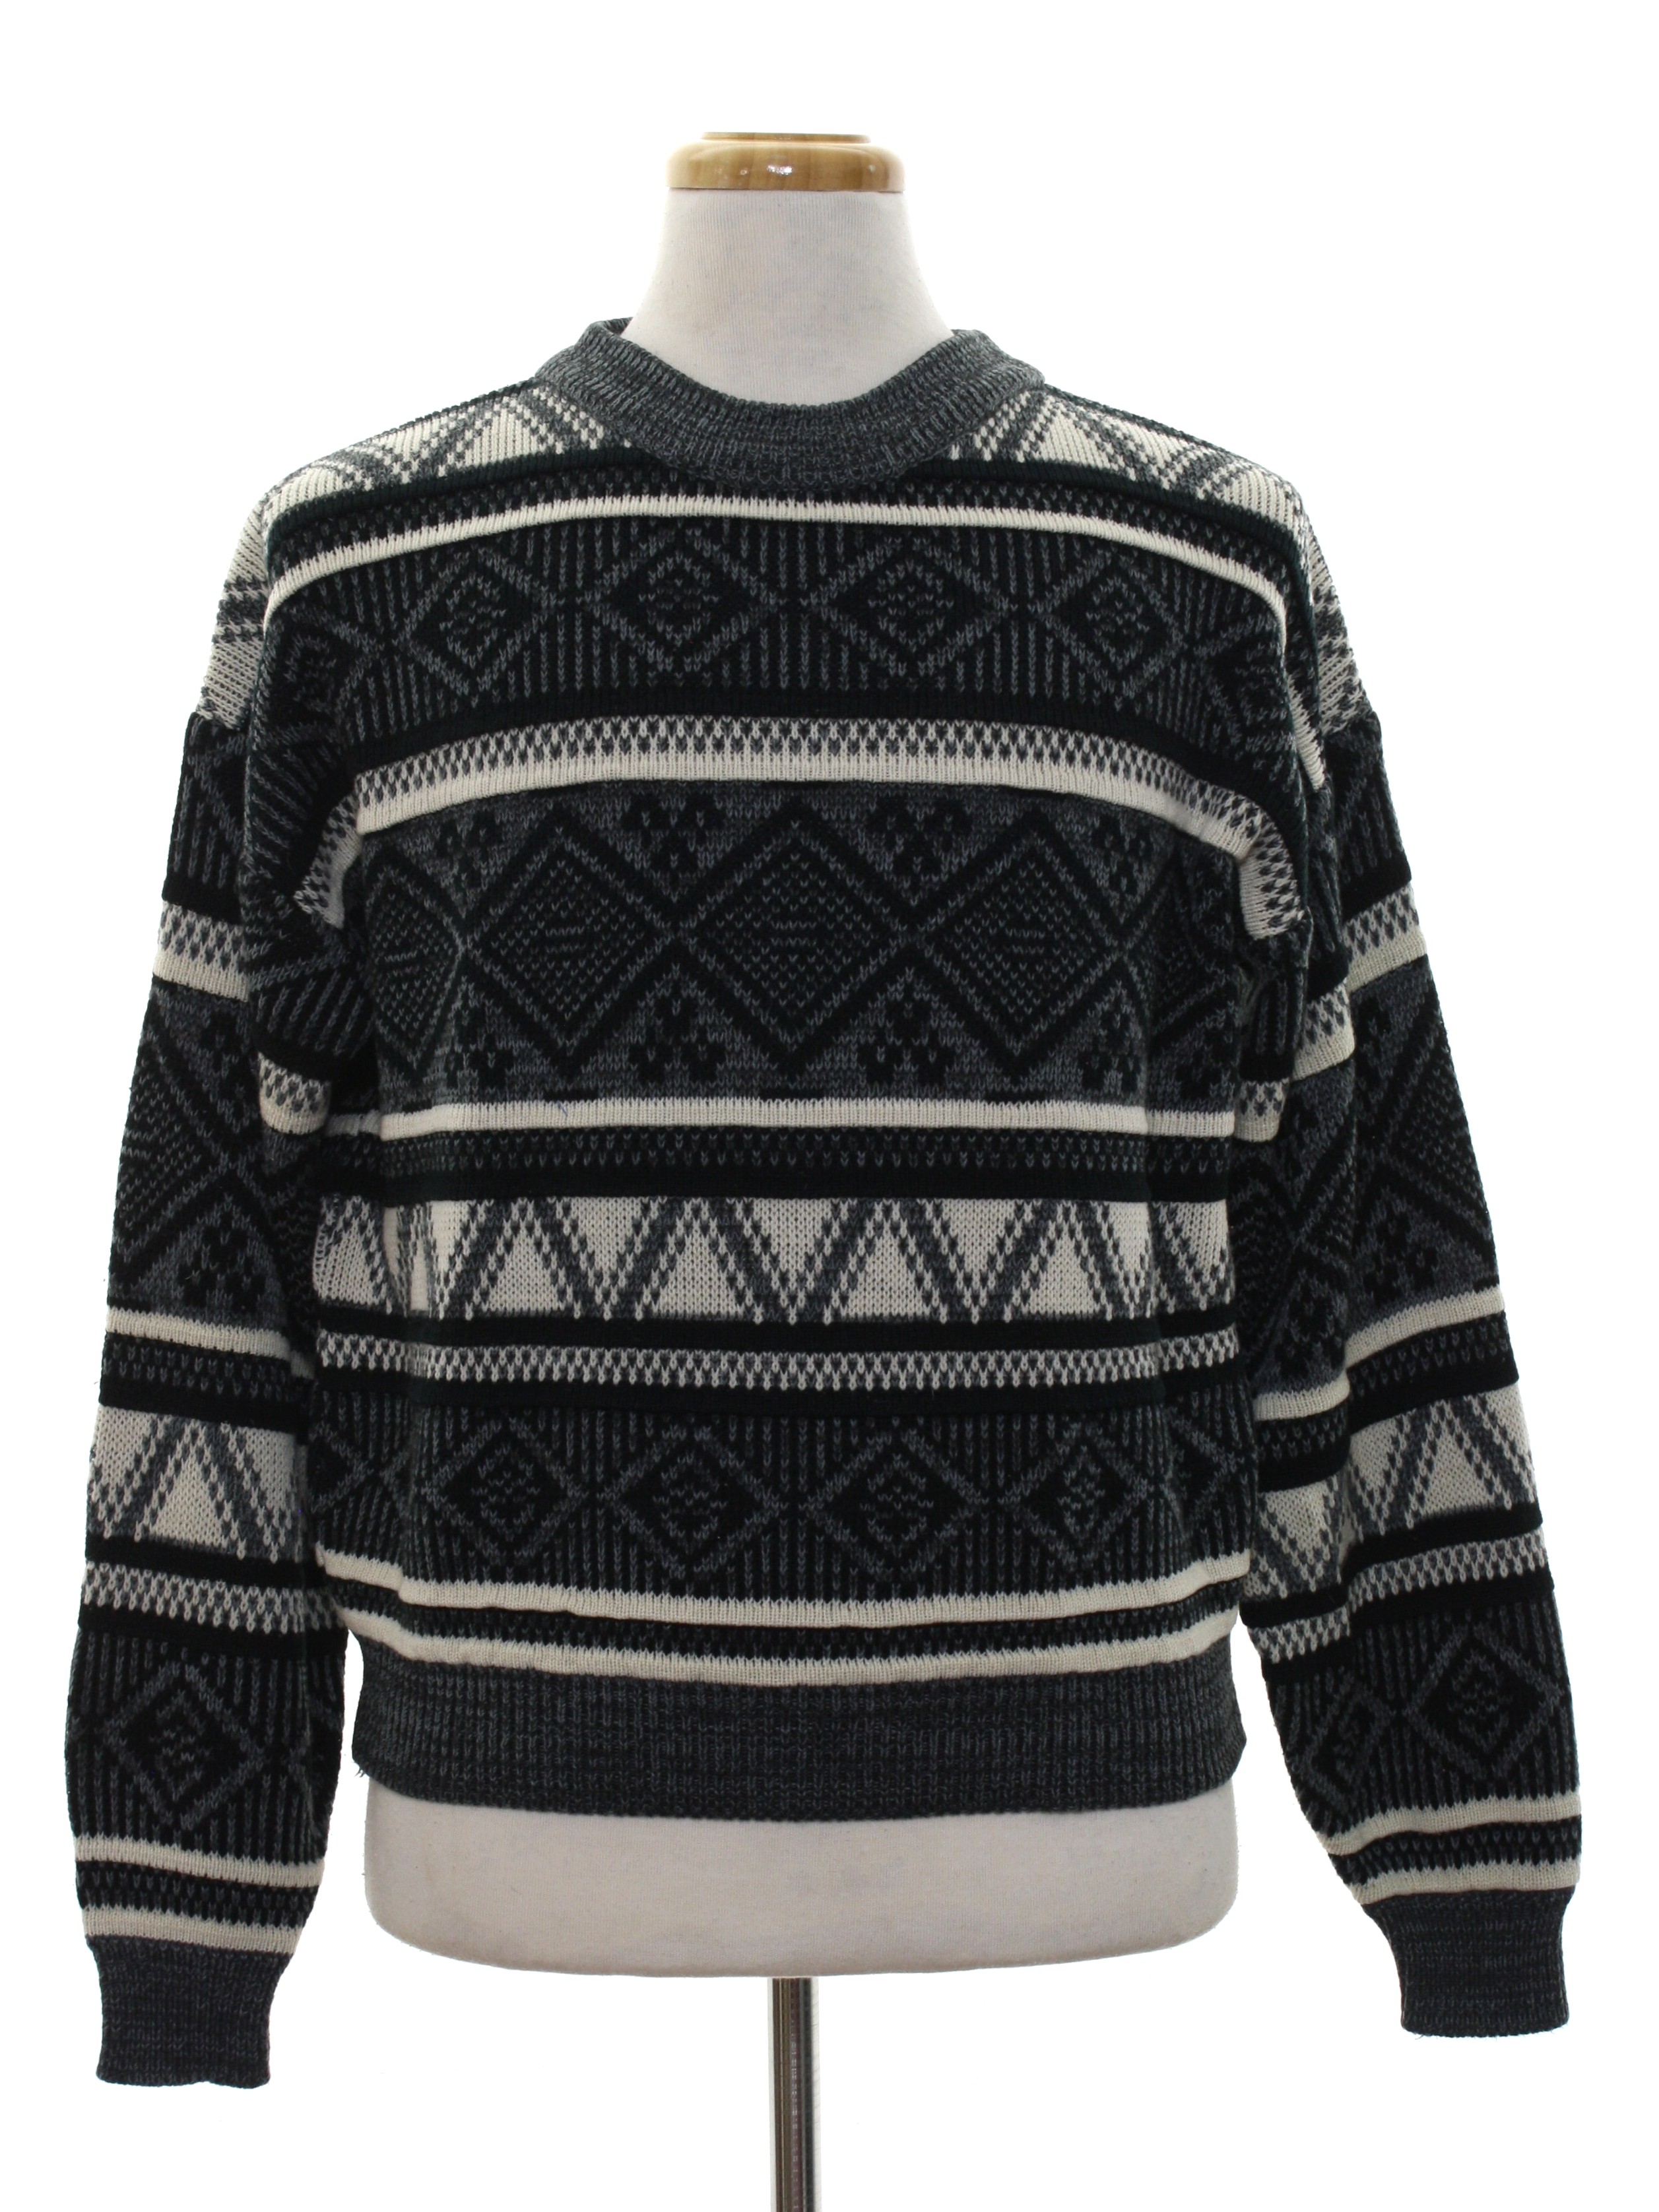 Vintage 1980's Sweater: 80s -The Mens Store- Mens black, grey and white ...